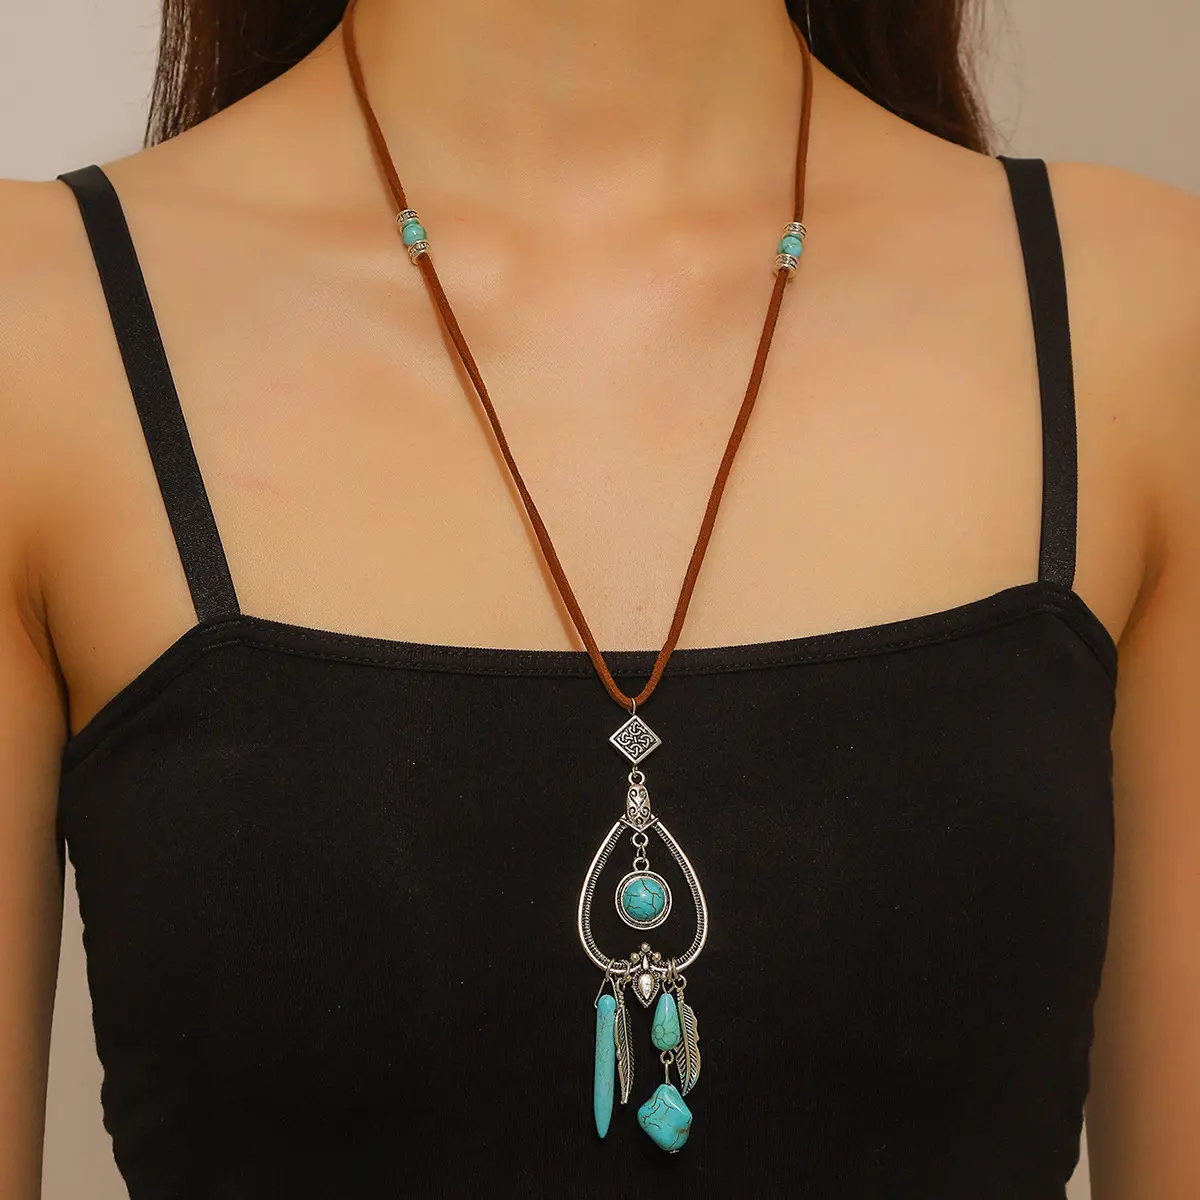 Boho Ethnic Accessories Turquoise Pendant Necklace for Women Vintage Leather Necklaces Sweater Chain